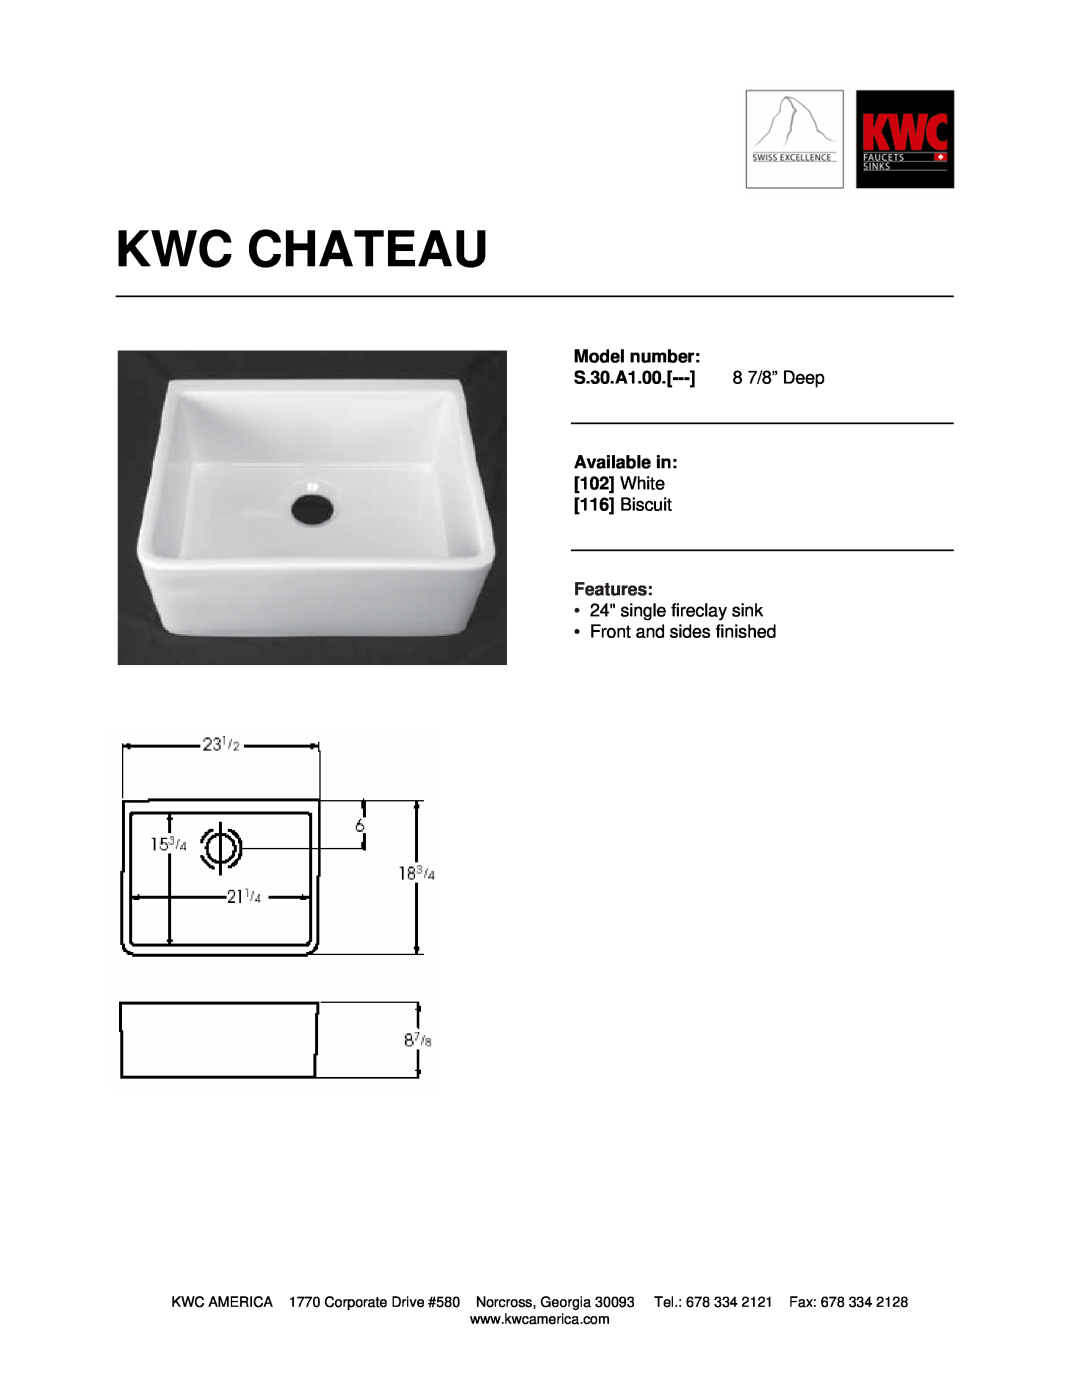 KWC S.30.A1.00 manual Kwc Chateau, Model number, 8 7/8” Deep, Available in 102 White, Biscuit, Features 